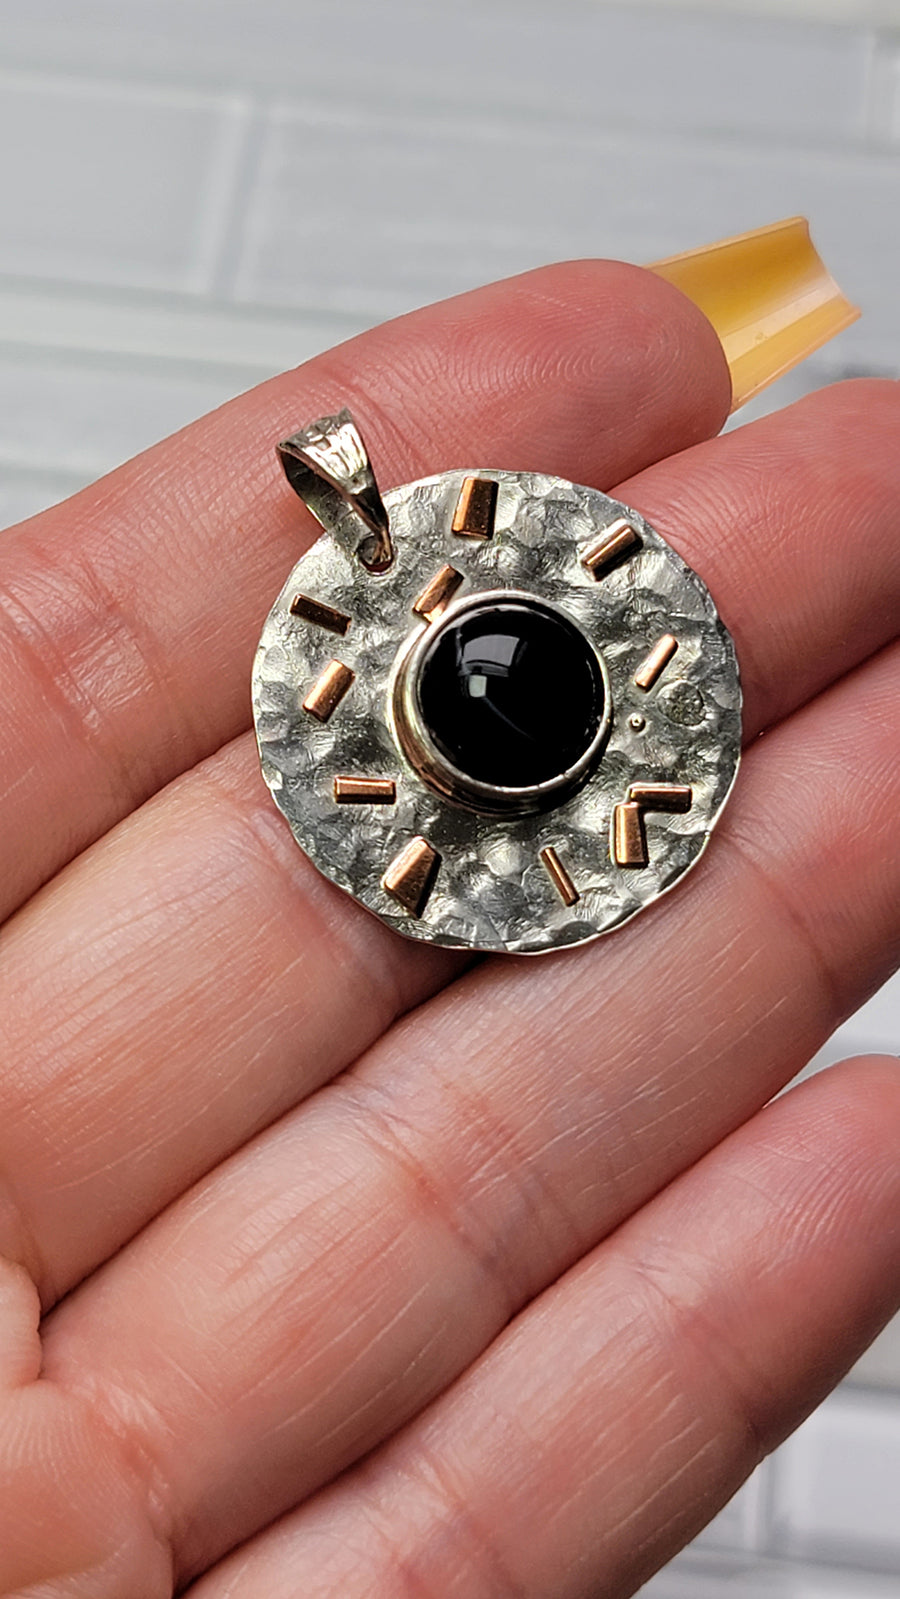 Black Agate Gemstone Sterling Silver and Copper Pendant